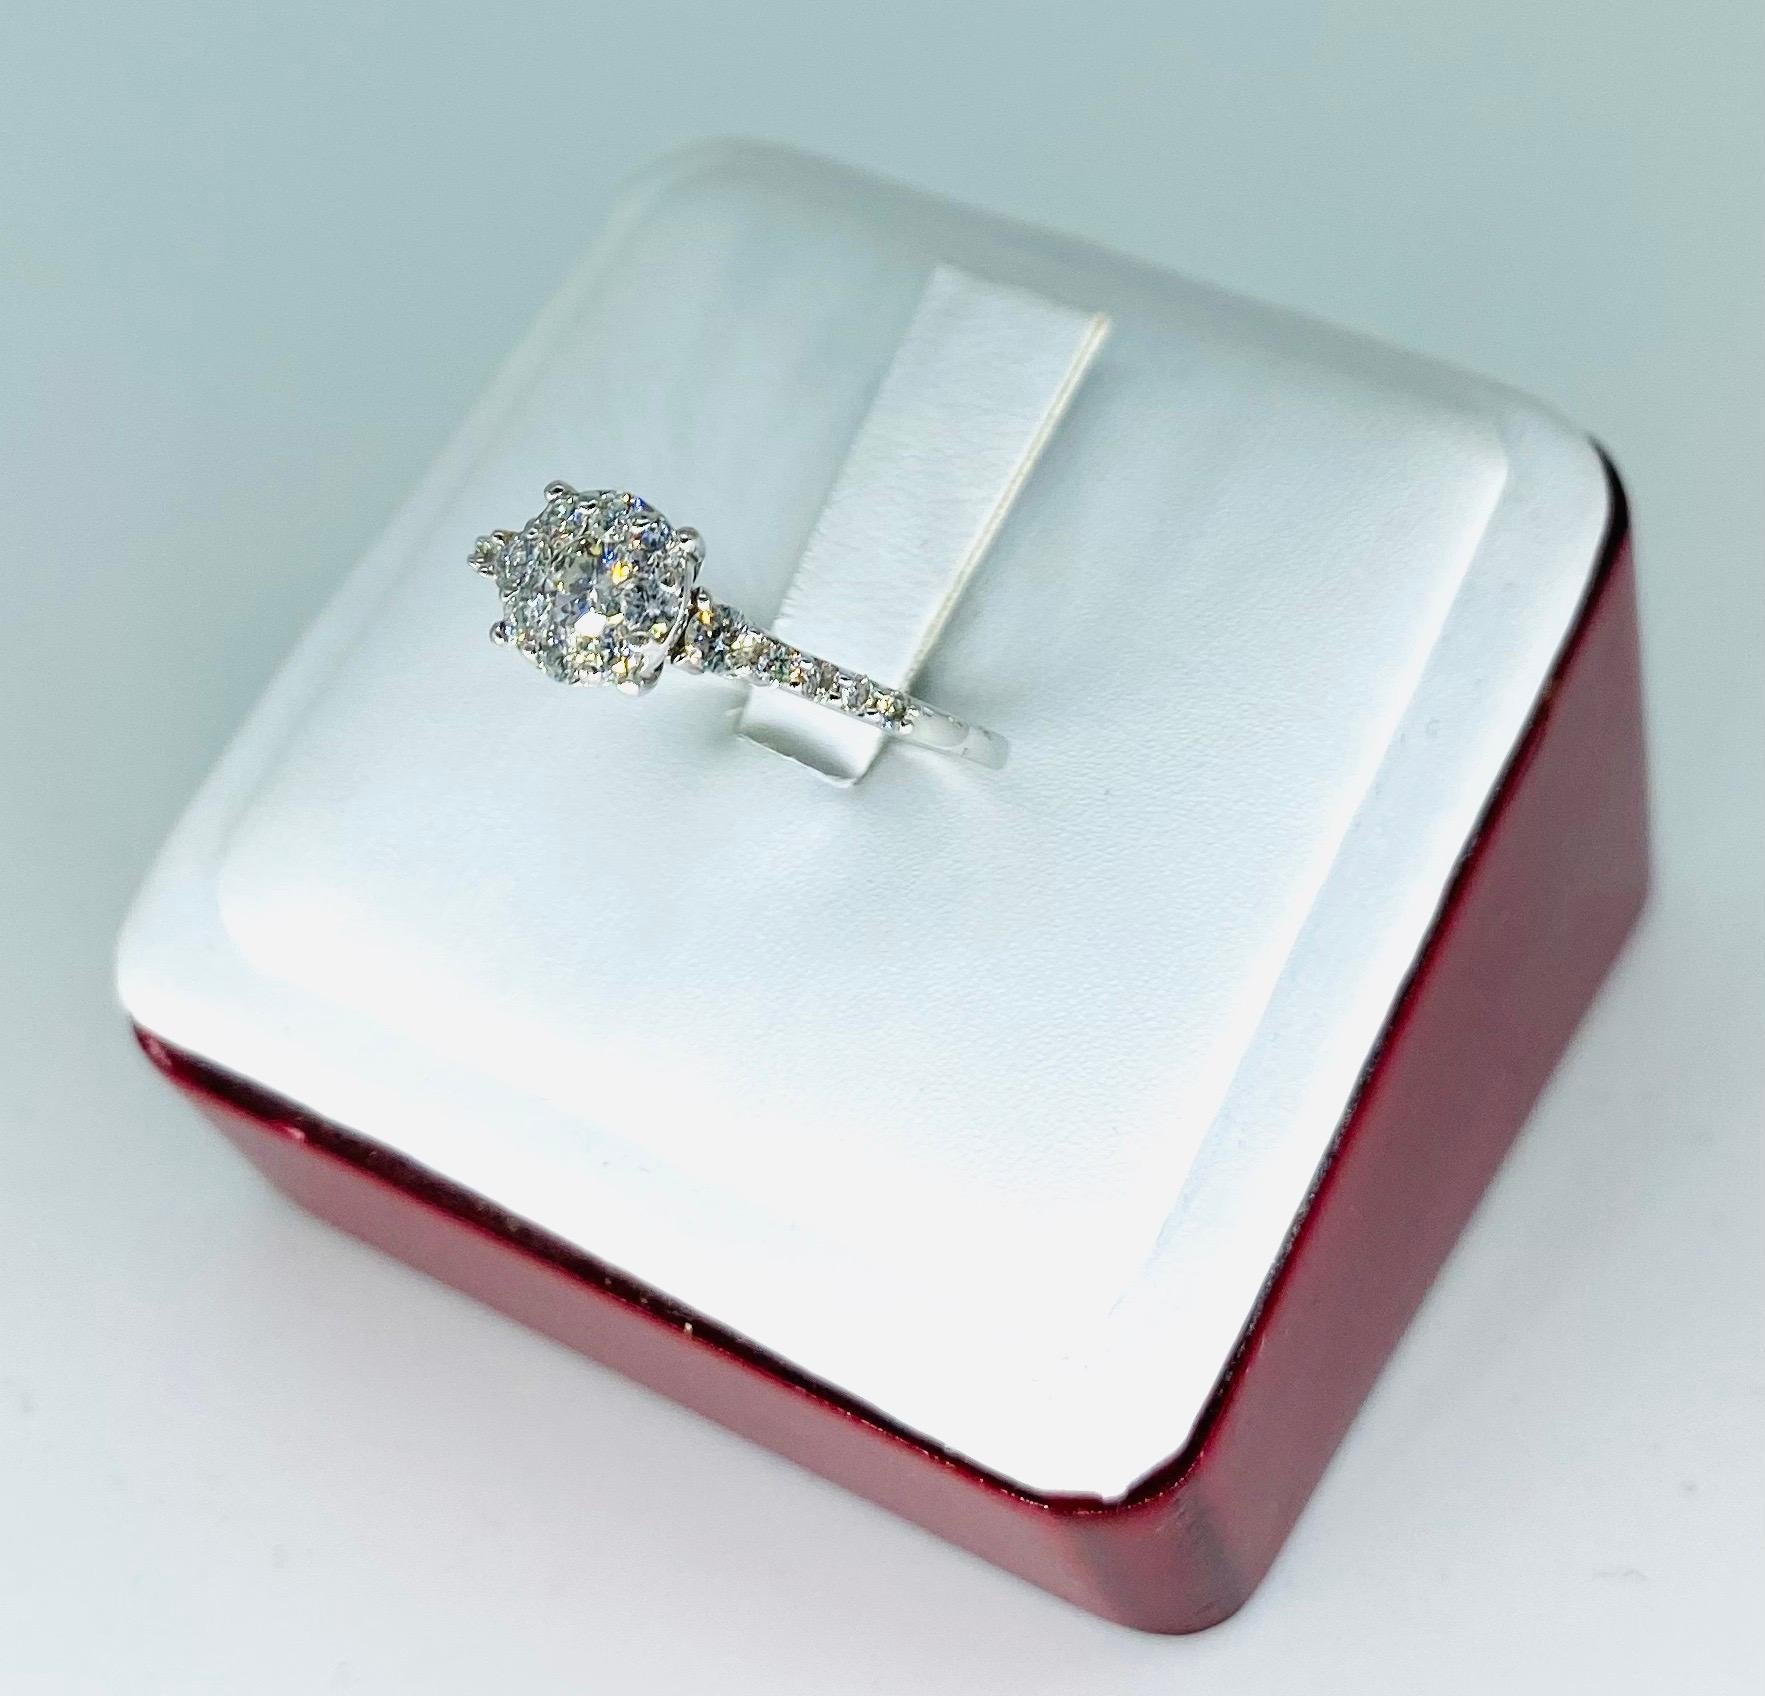 Vintage 1 Carat Diamonds Halo Engagement Ring 14k White Gold. The ring is very impressive with a designer with PAT # and stamped 14k. Very quality quality diamokds making sure they sparkle when light hits. The total amount of diamonds in weight is